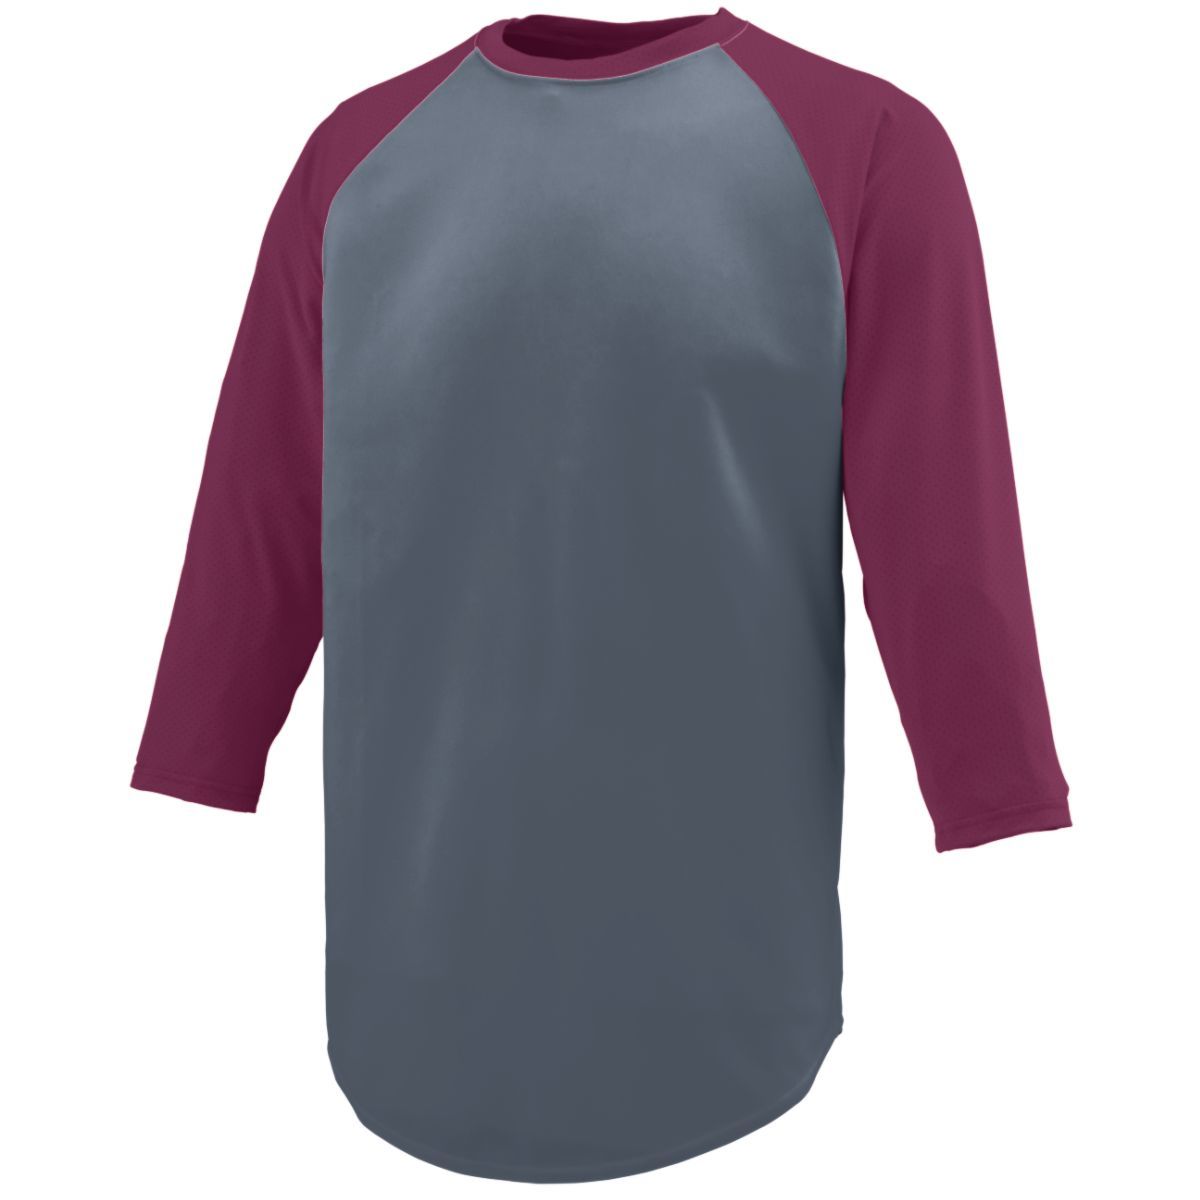 Augusta Sportswear Nova Jersey in Graphite/Maroon  -Part of the Adult, Adult-Jersey, Augusta-Products, Baseball, Shirts, All-Sports, All-Sports-1 product lines at KanaleyCreations.com